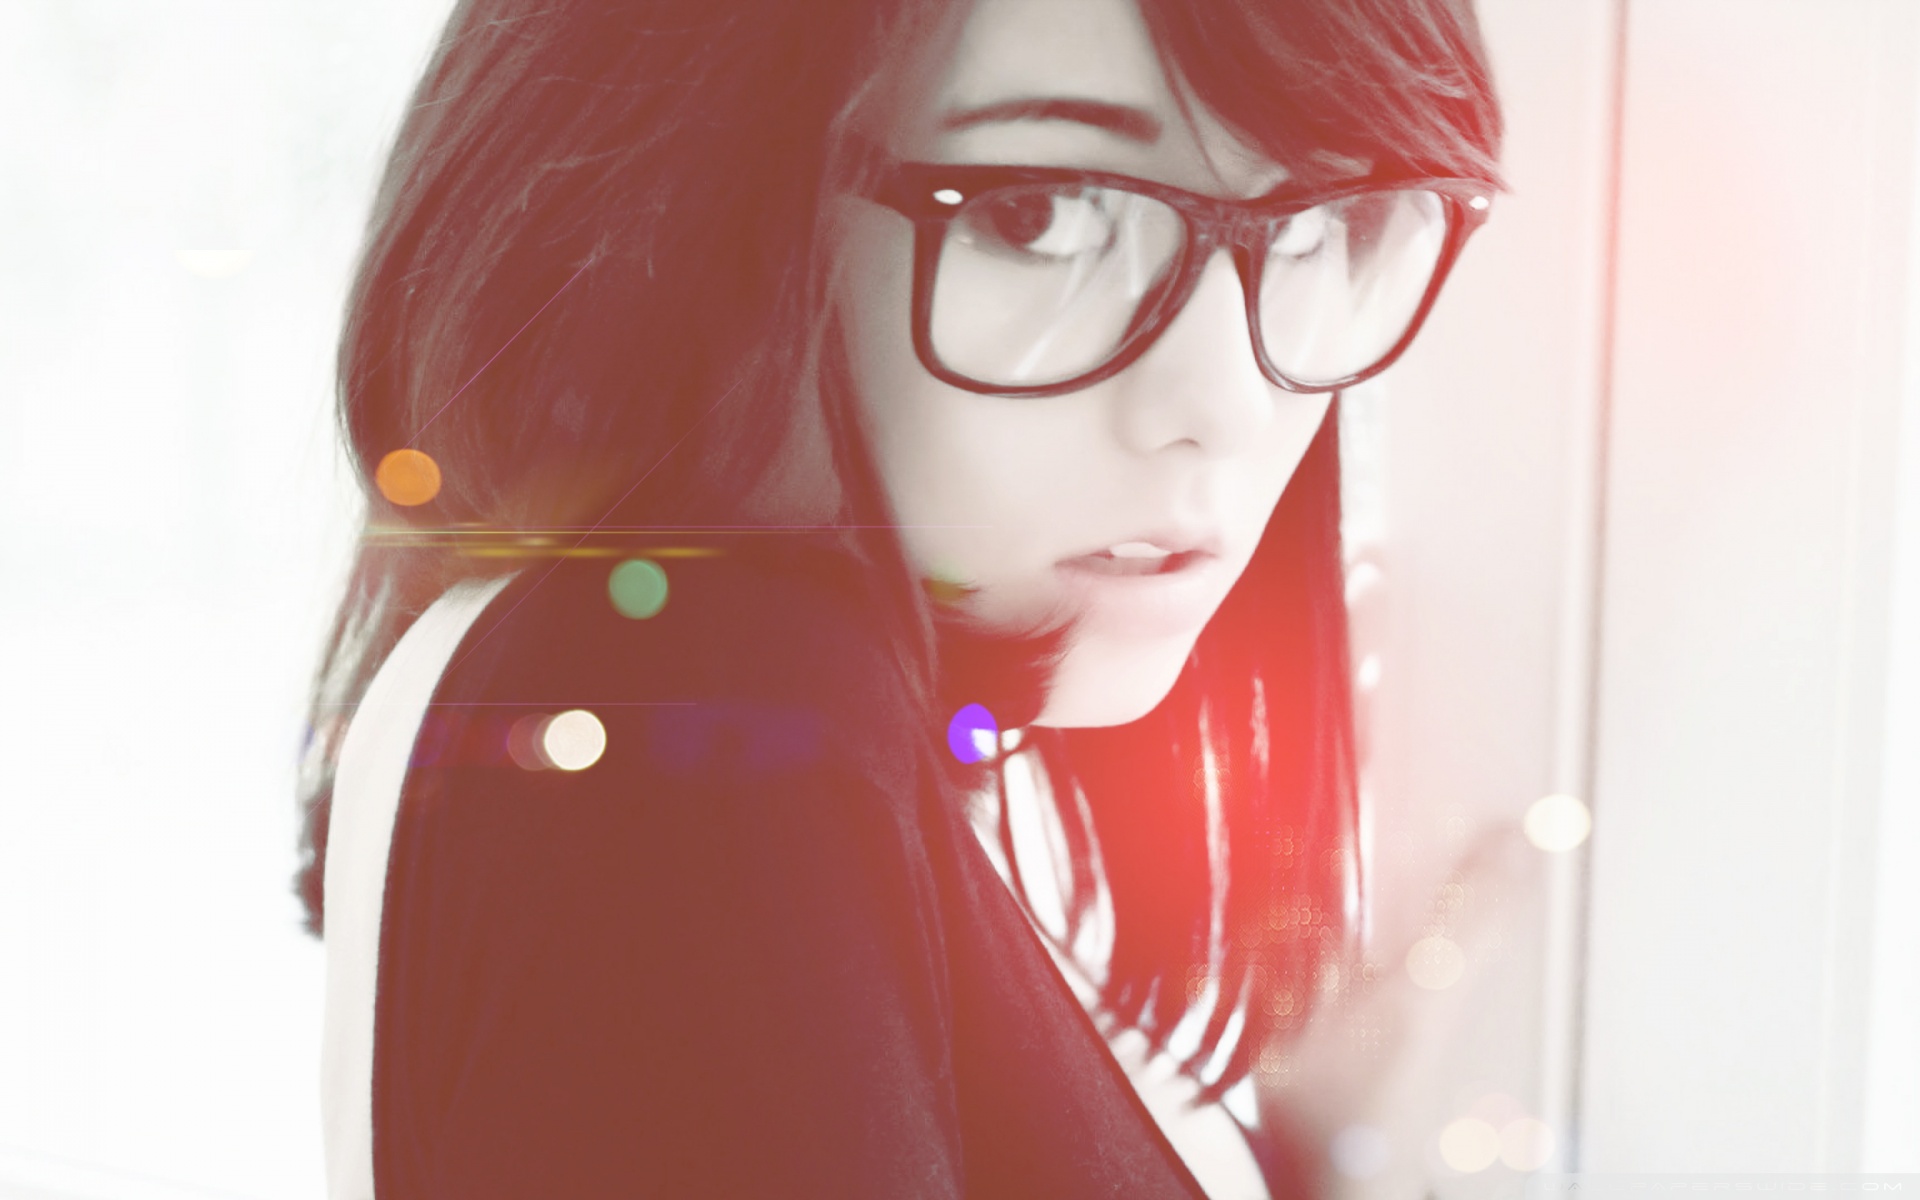 Cute Girl With Glasses - 1920x1200 Wallpaper 